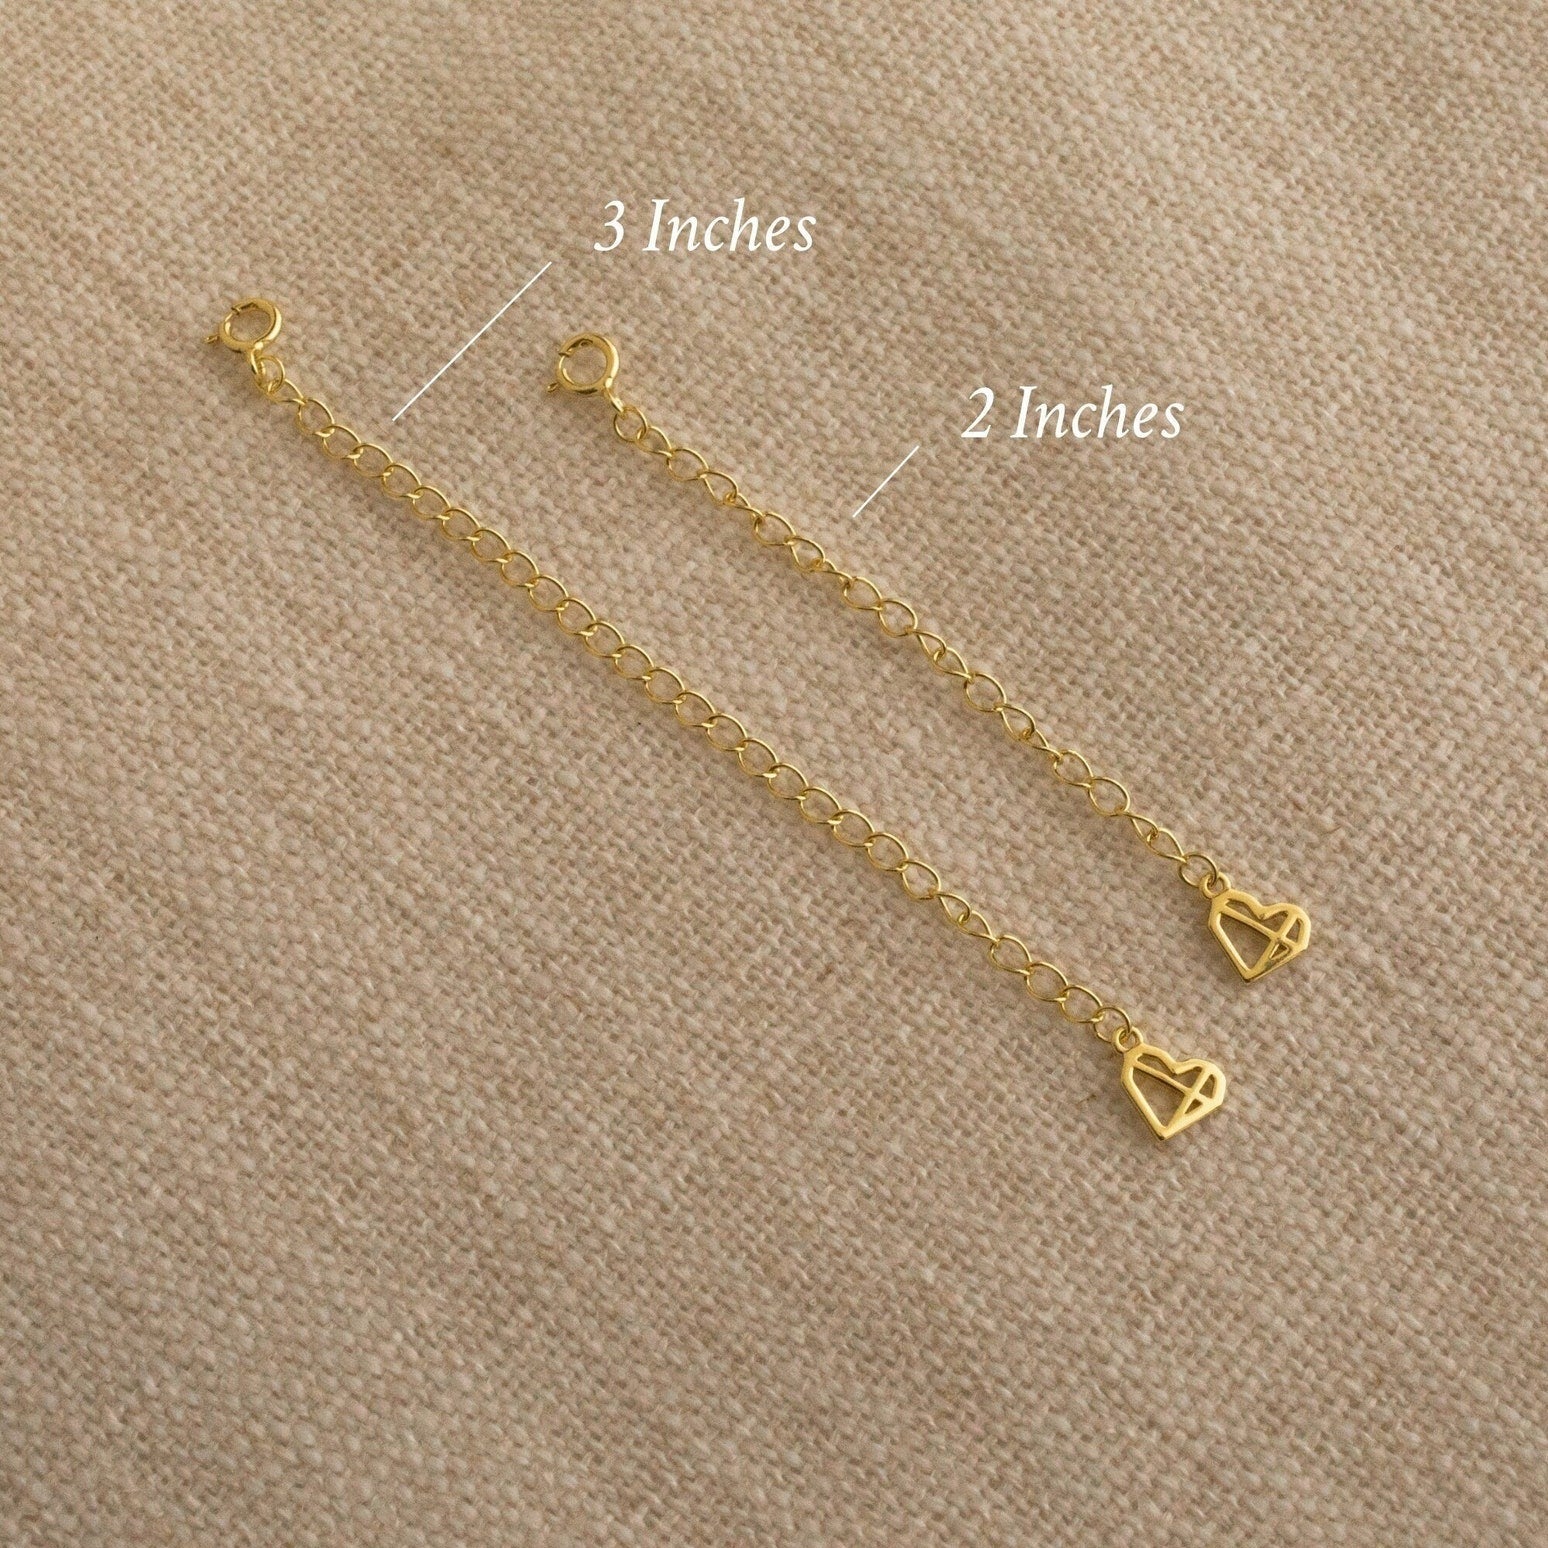  Altitude Boutique 18k Gold Plated Necklace Extenders Delicate  Necklace Extender Chain Set for Women 3 Piece Set, Extensions 1, 2, 3  Inches Hypoallergenic in Gold, Rose Gold, or Silver (Gold) 